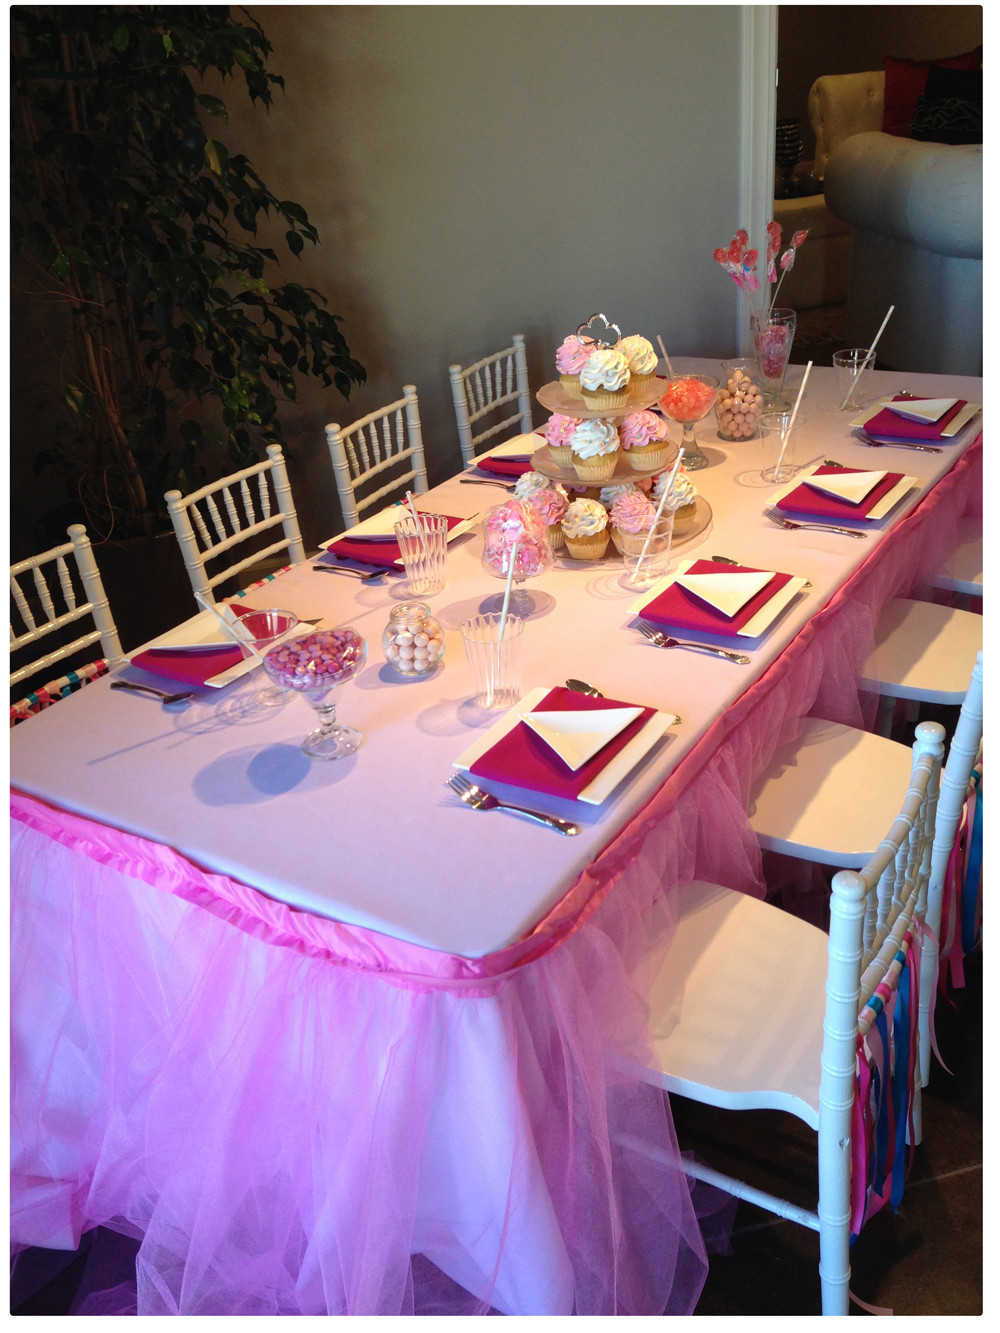 Birthday Party Table Decorations
 Princess Birthday Party Table